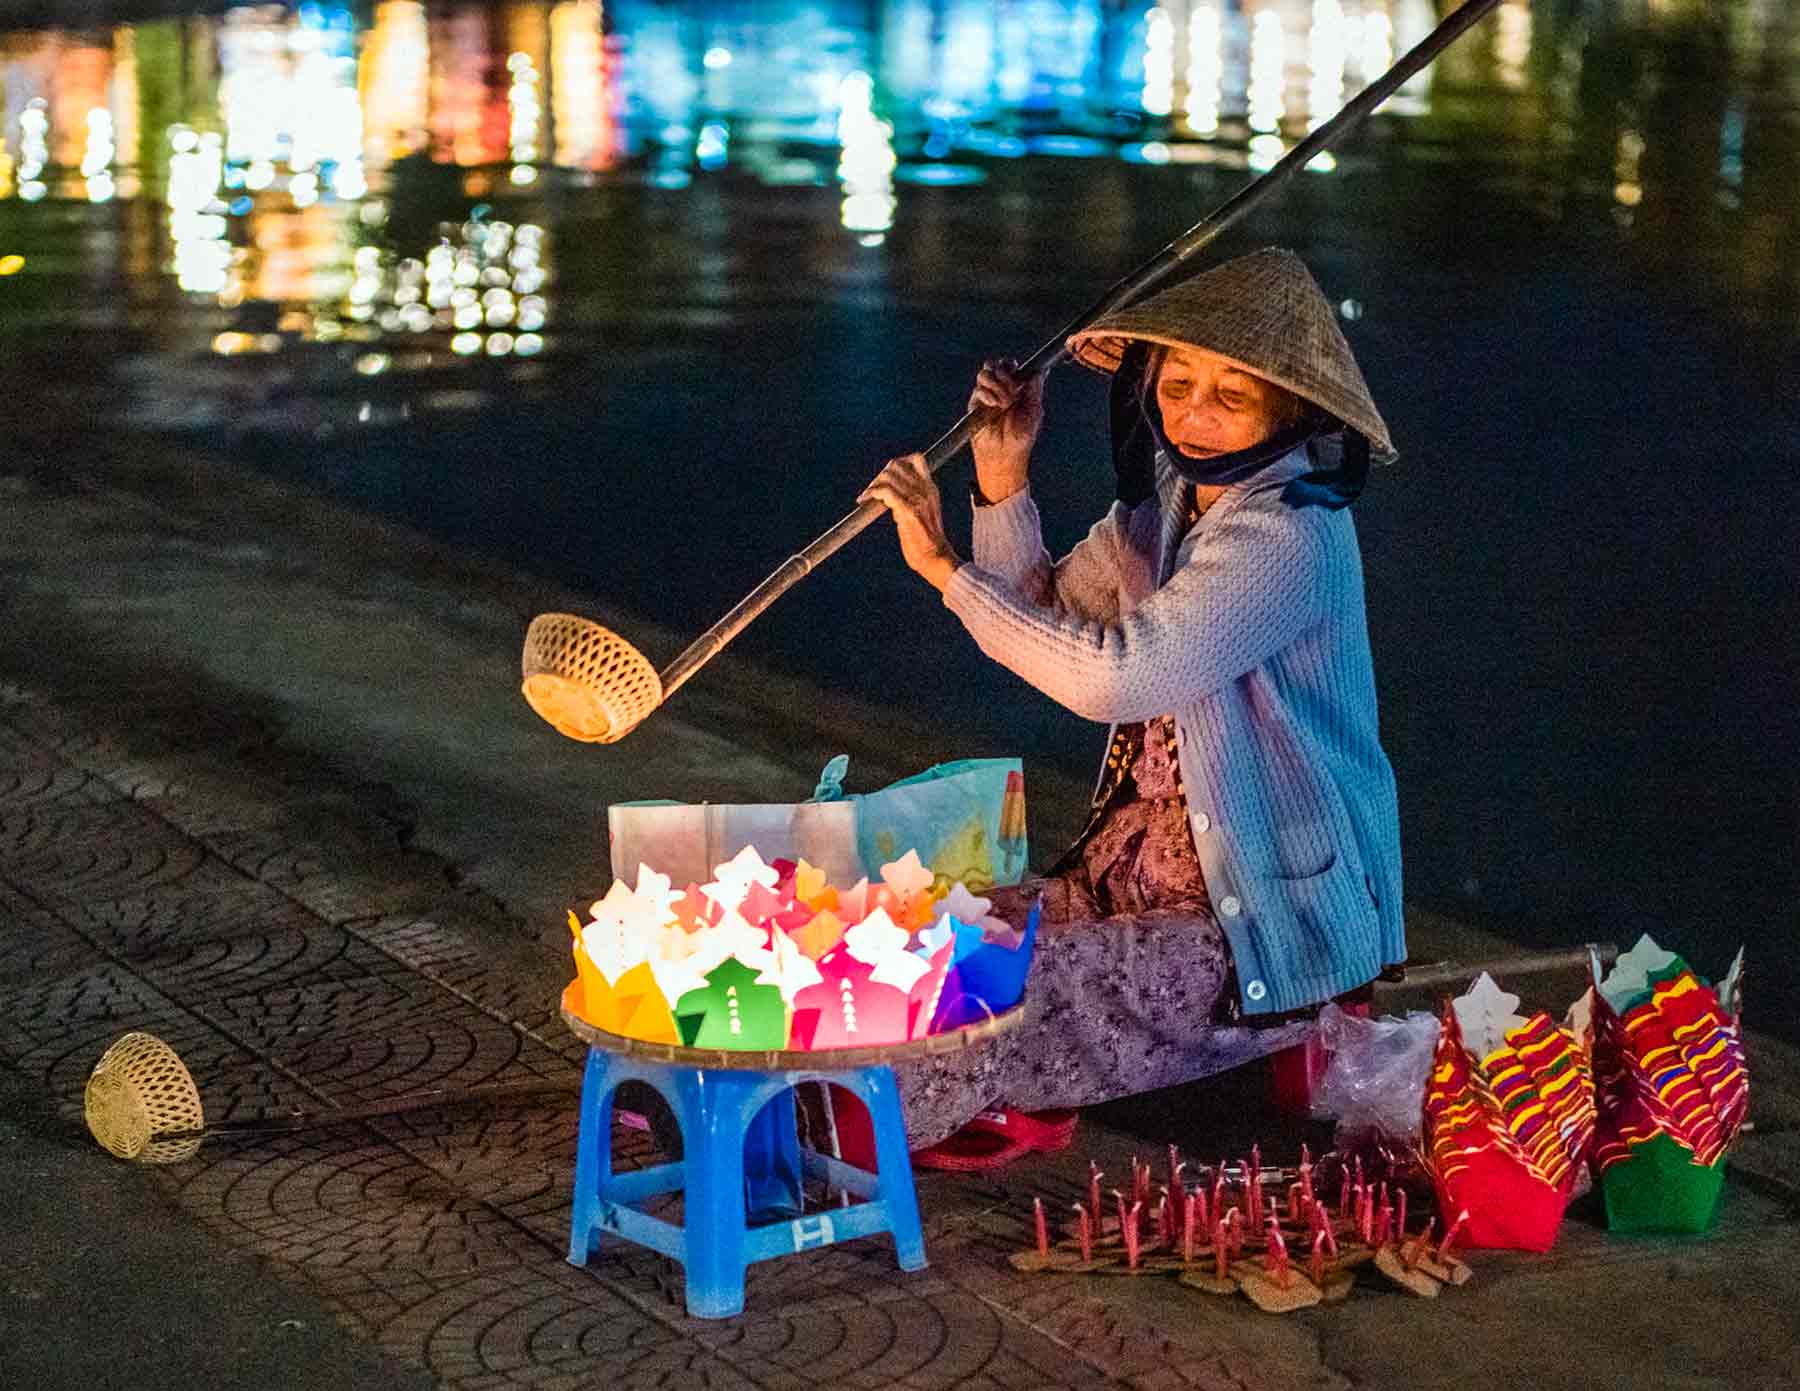 A Hoi An Vietnamese vendor selling colorful lanterns by a reflective river at night.